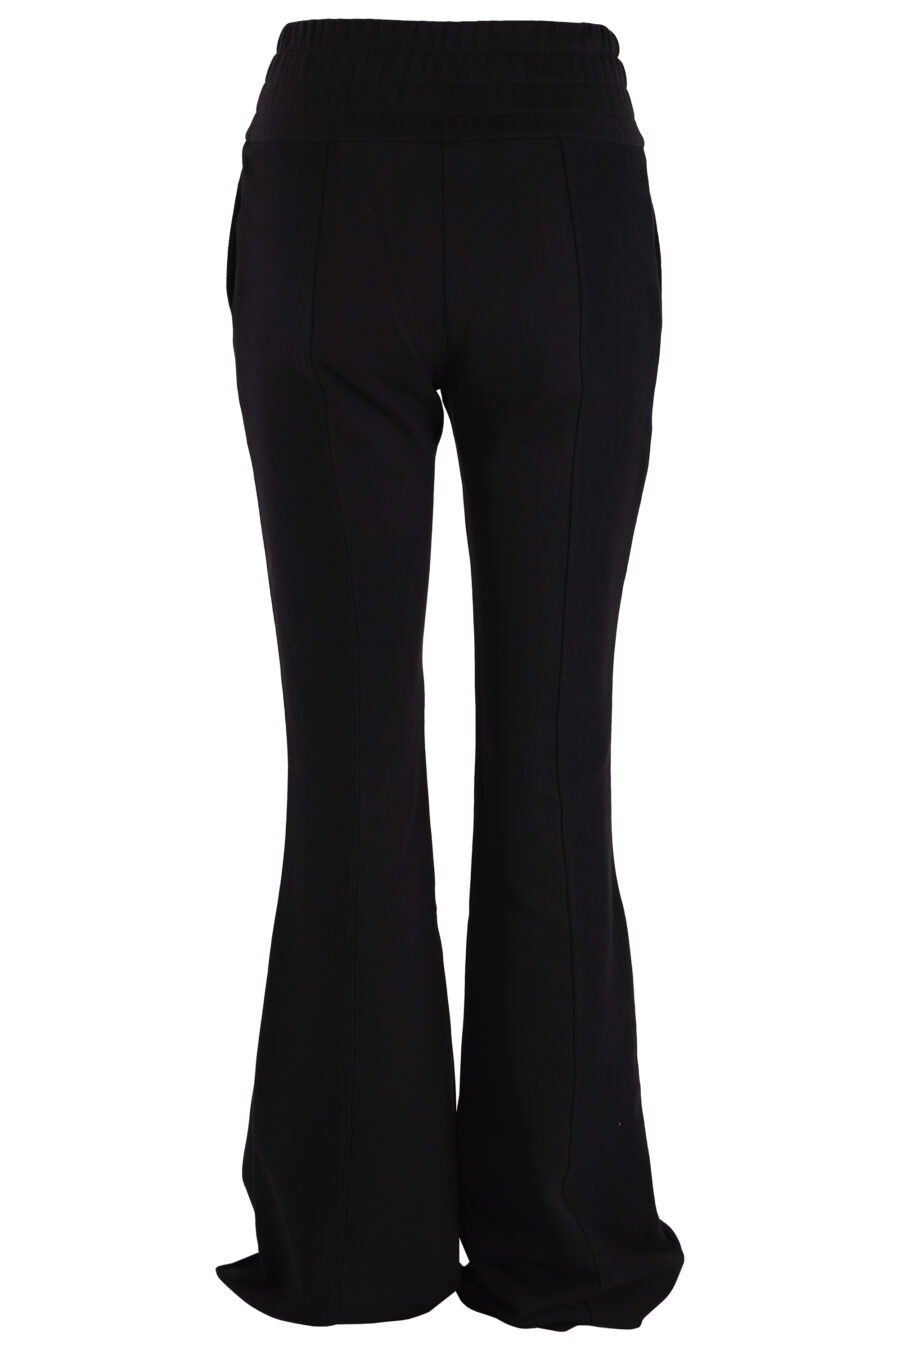 Flared black trousers with logo on waistband - IMG 3724